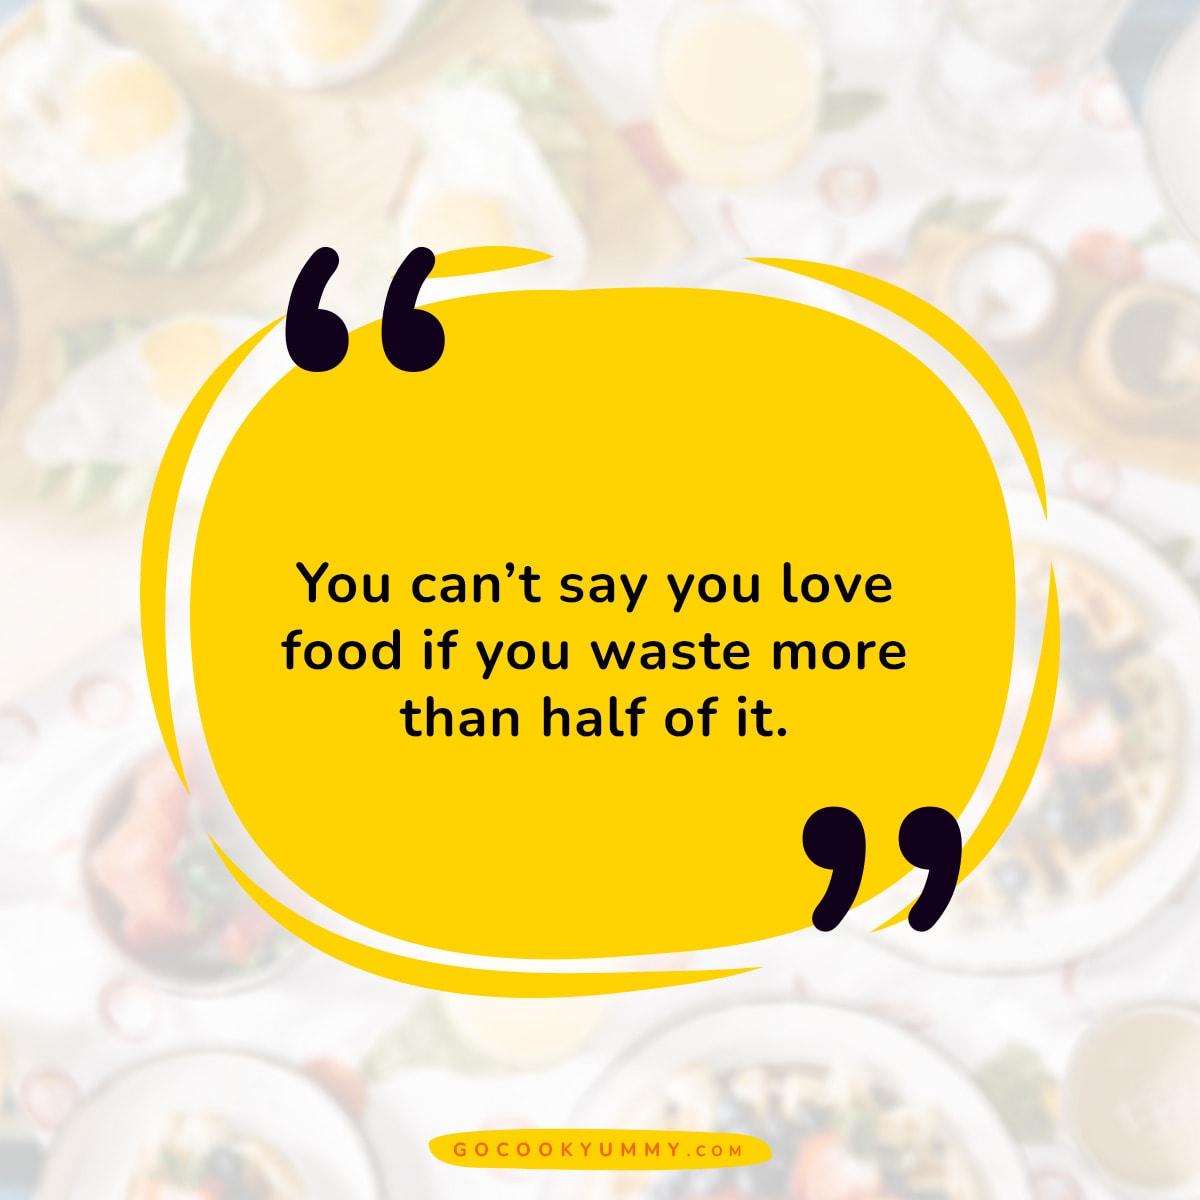 You can't say you love food if you waste more than half of it.